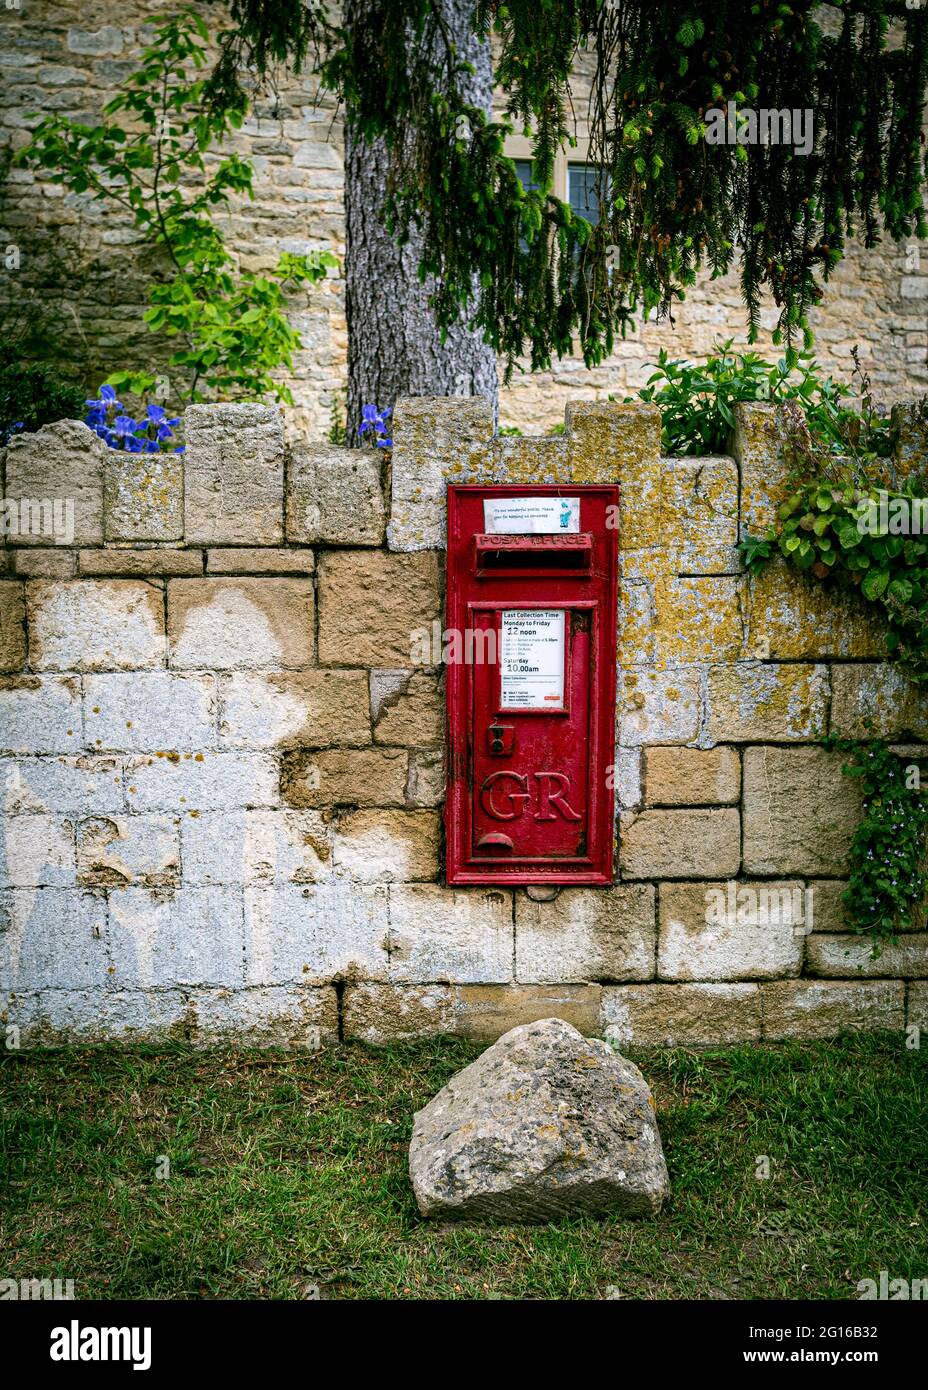 A George VI Royal Mail post box set in the wall of a garden. Stock Photo